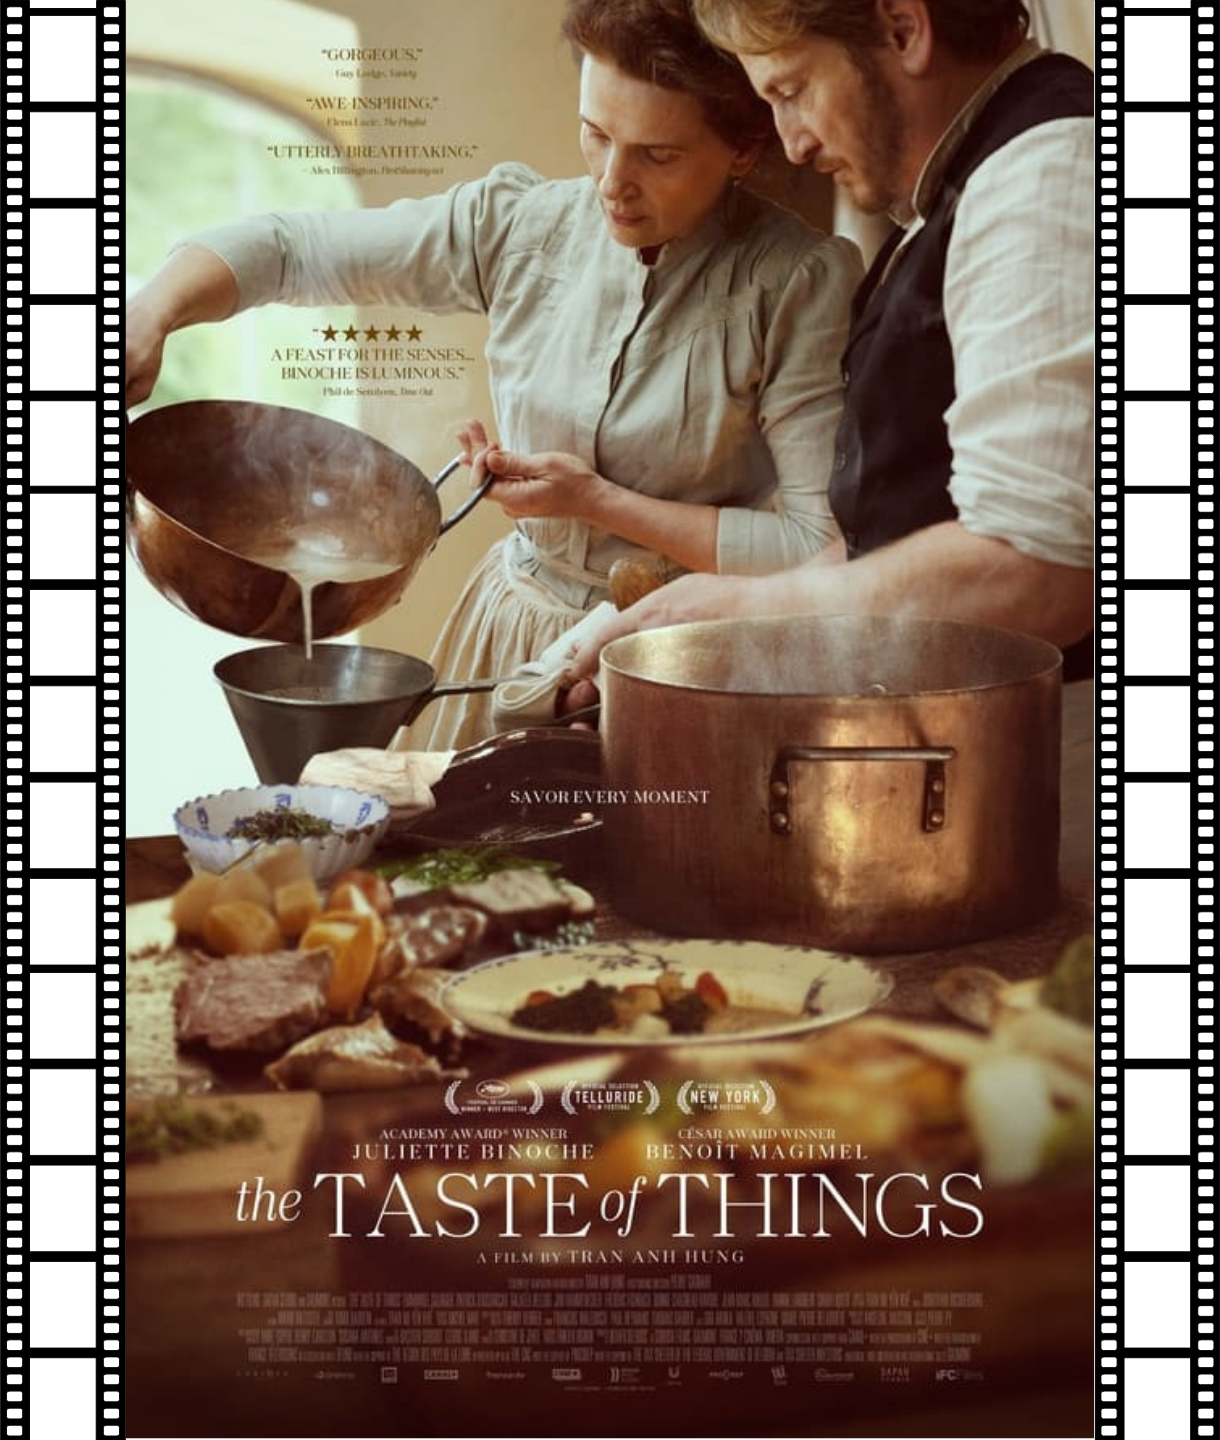 The Taste Of Things (12A) Poster Image